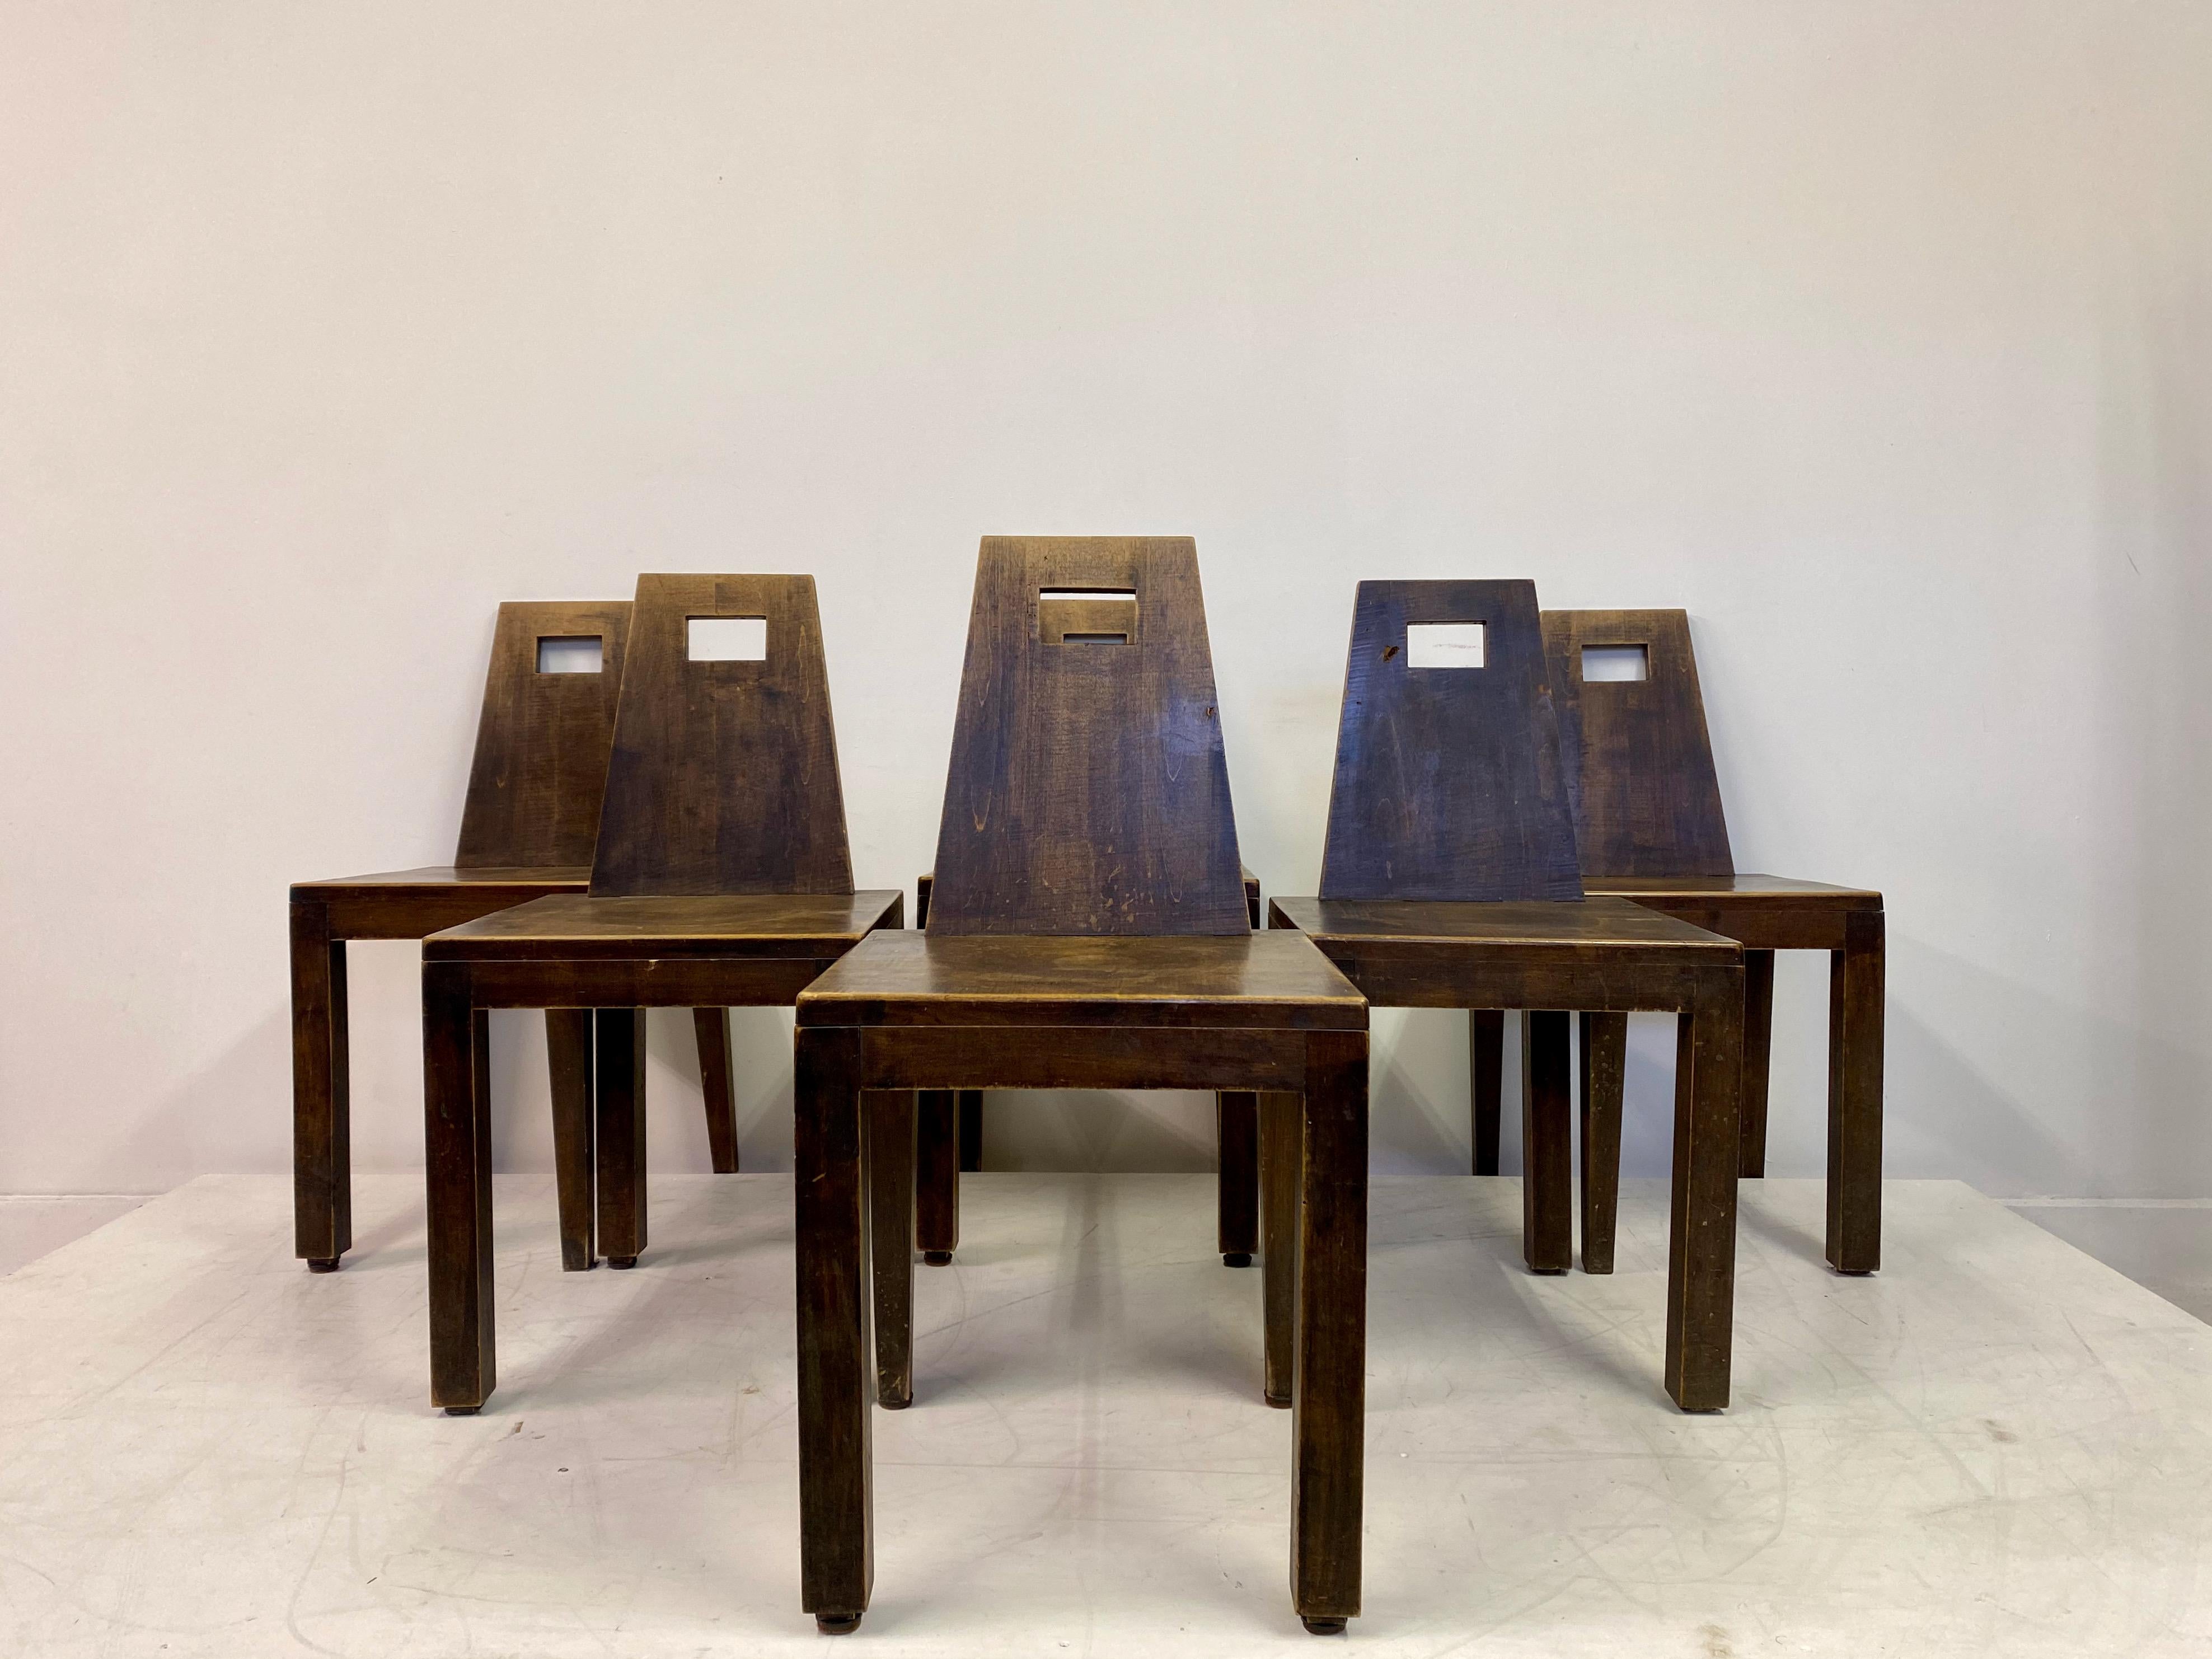 Six brutalist chairs

Simple almost rustic looking

Constructivist

Nice patina

Early to mid 20th Century.
 